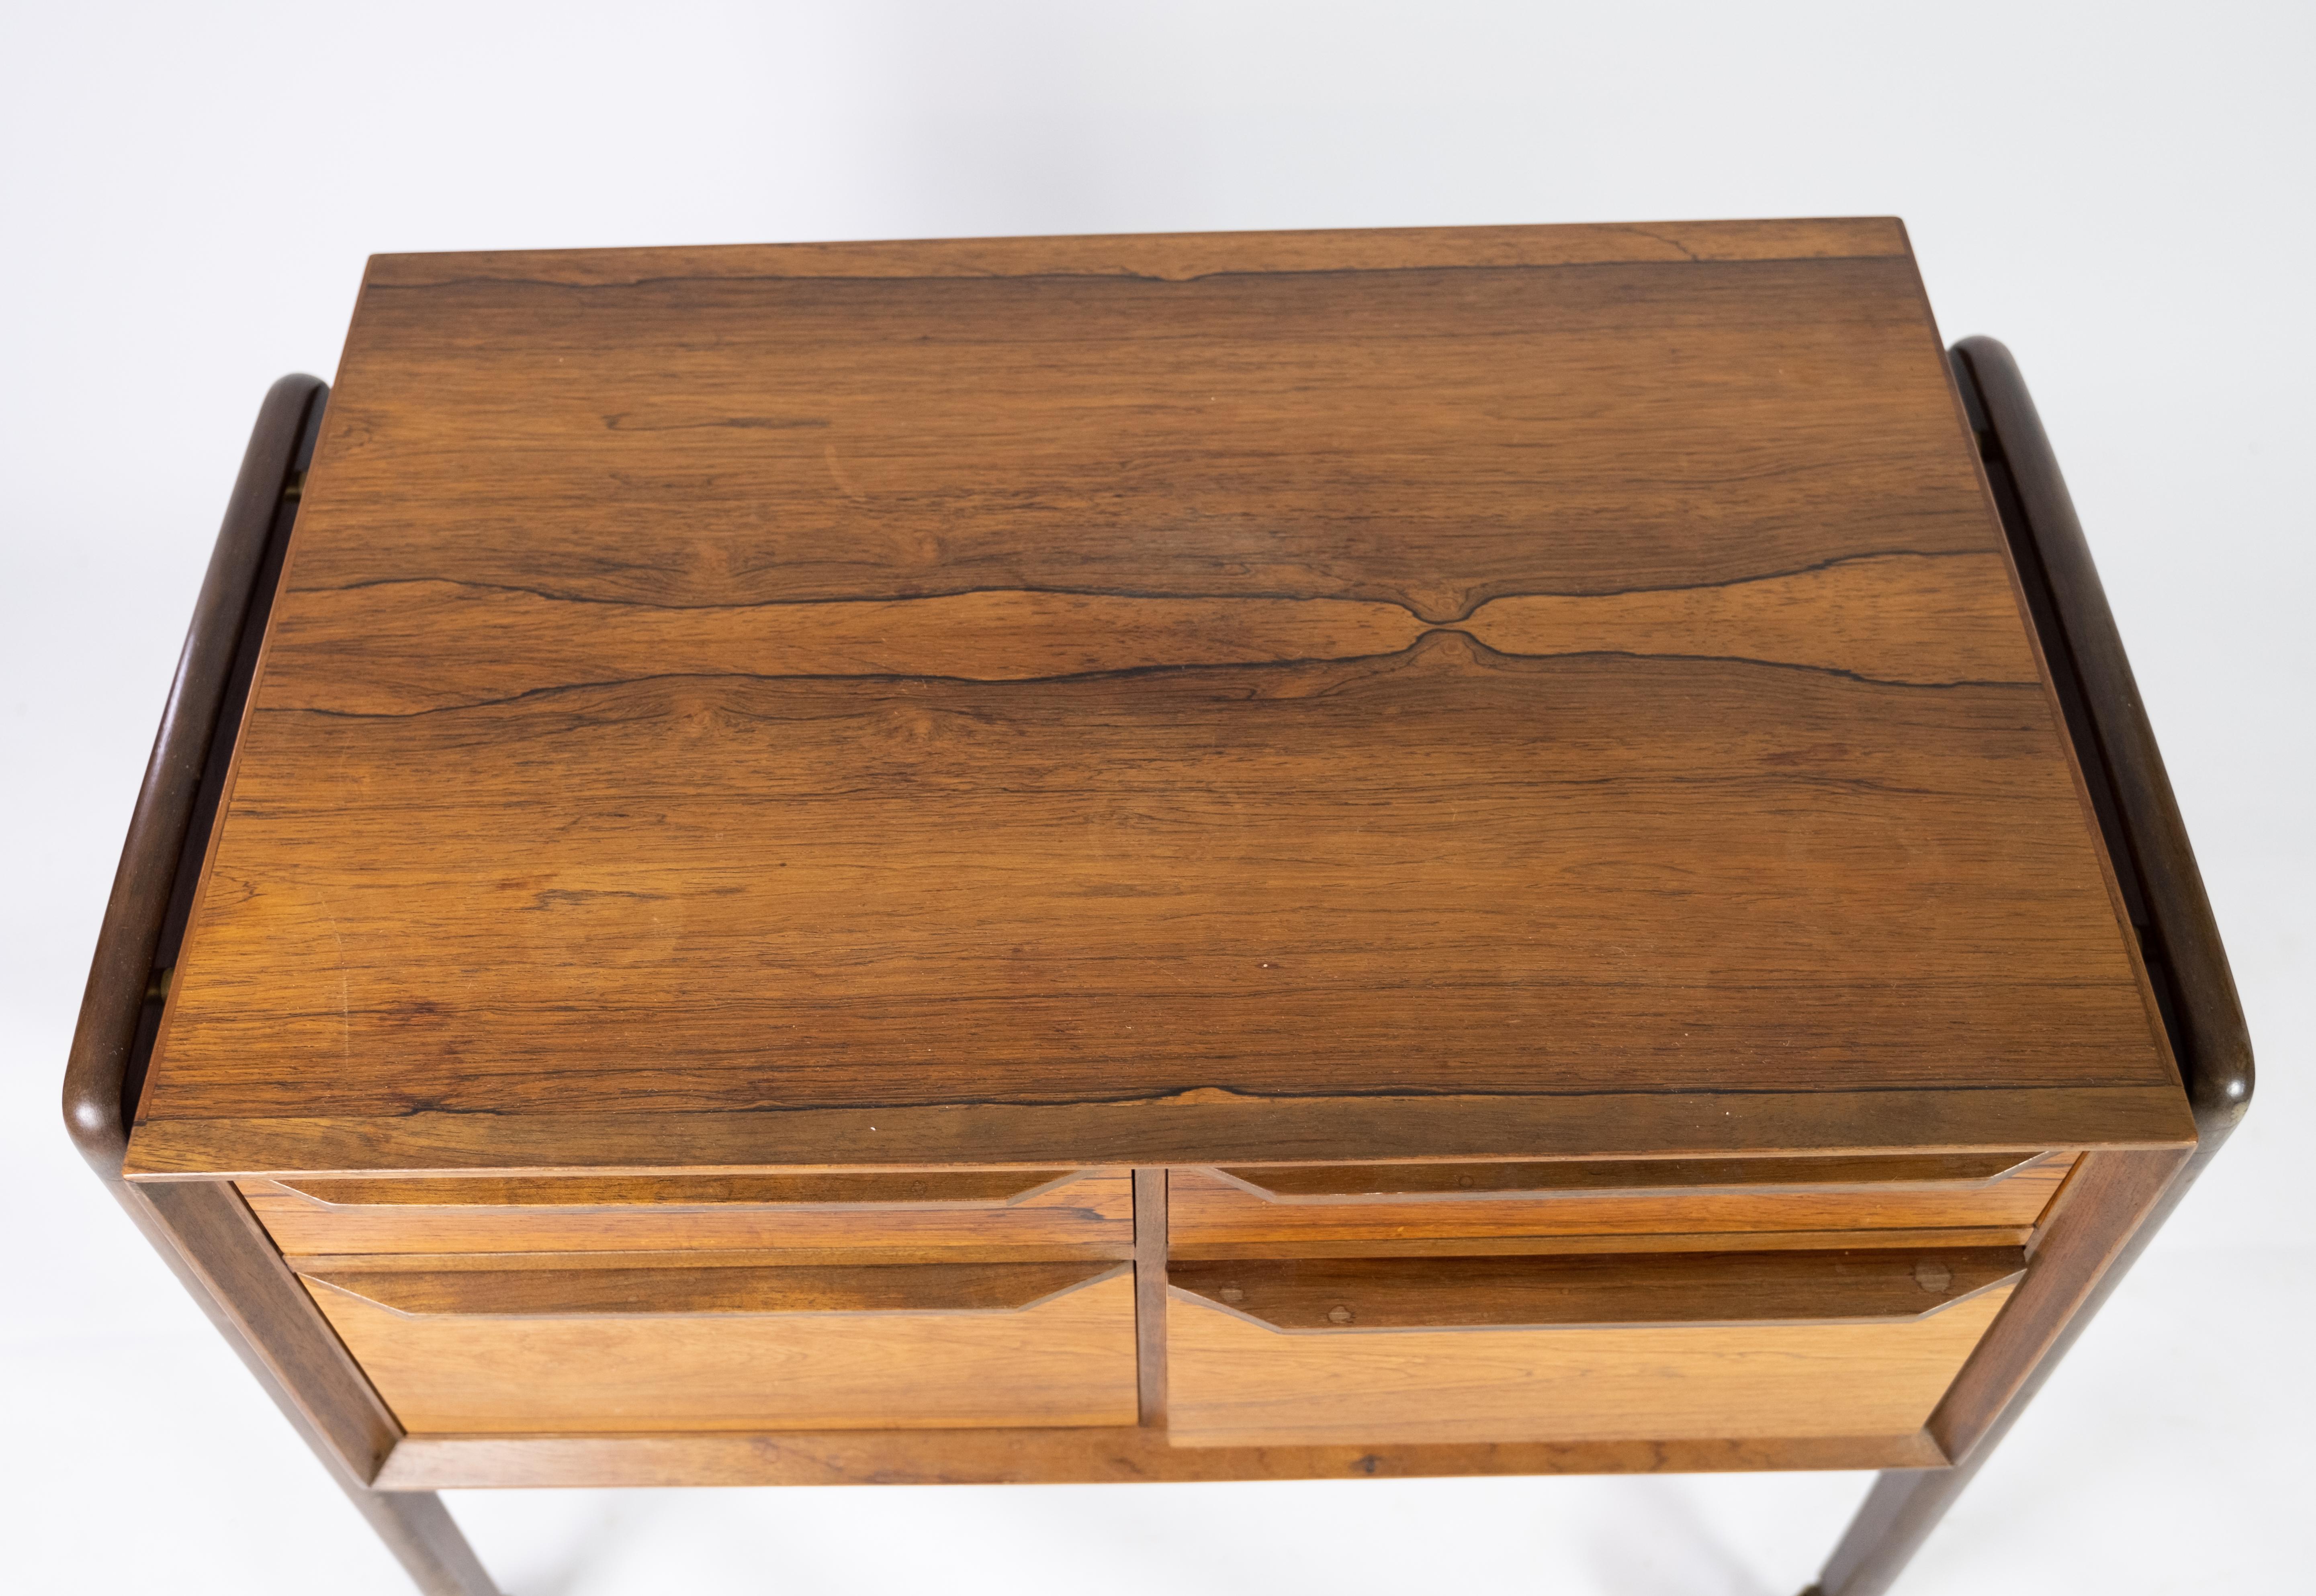 Scandinavian Modern Small Chest of Drawers on Wheels in Rosewood of Danish Design from the 1960s For Sale